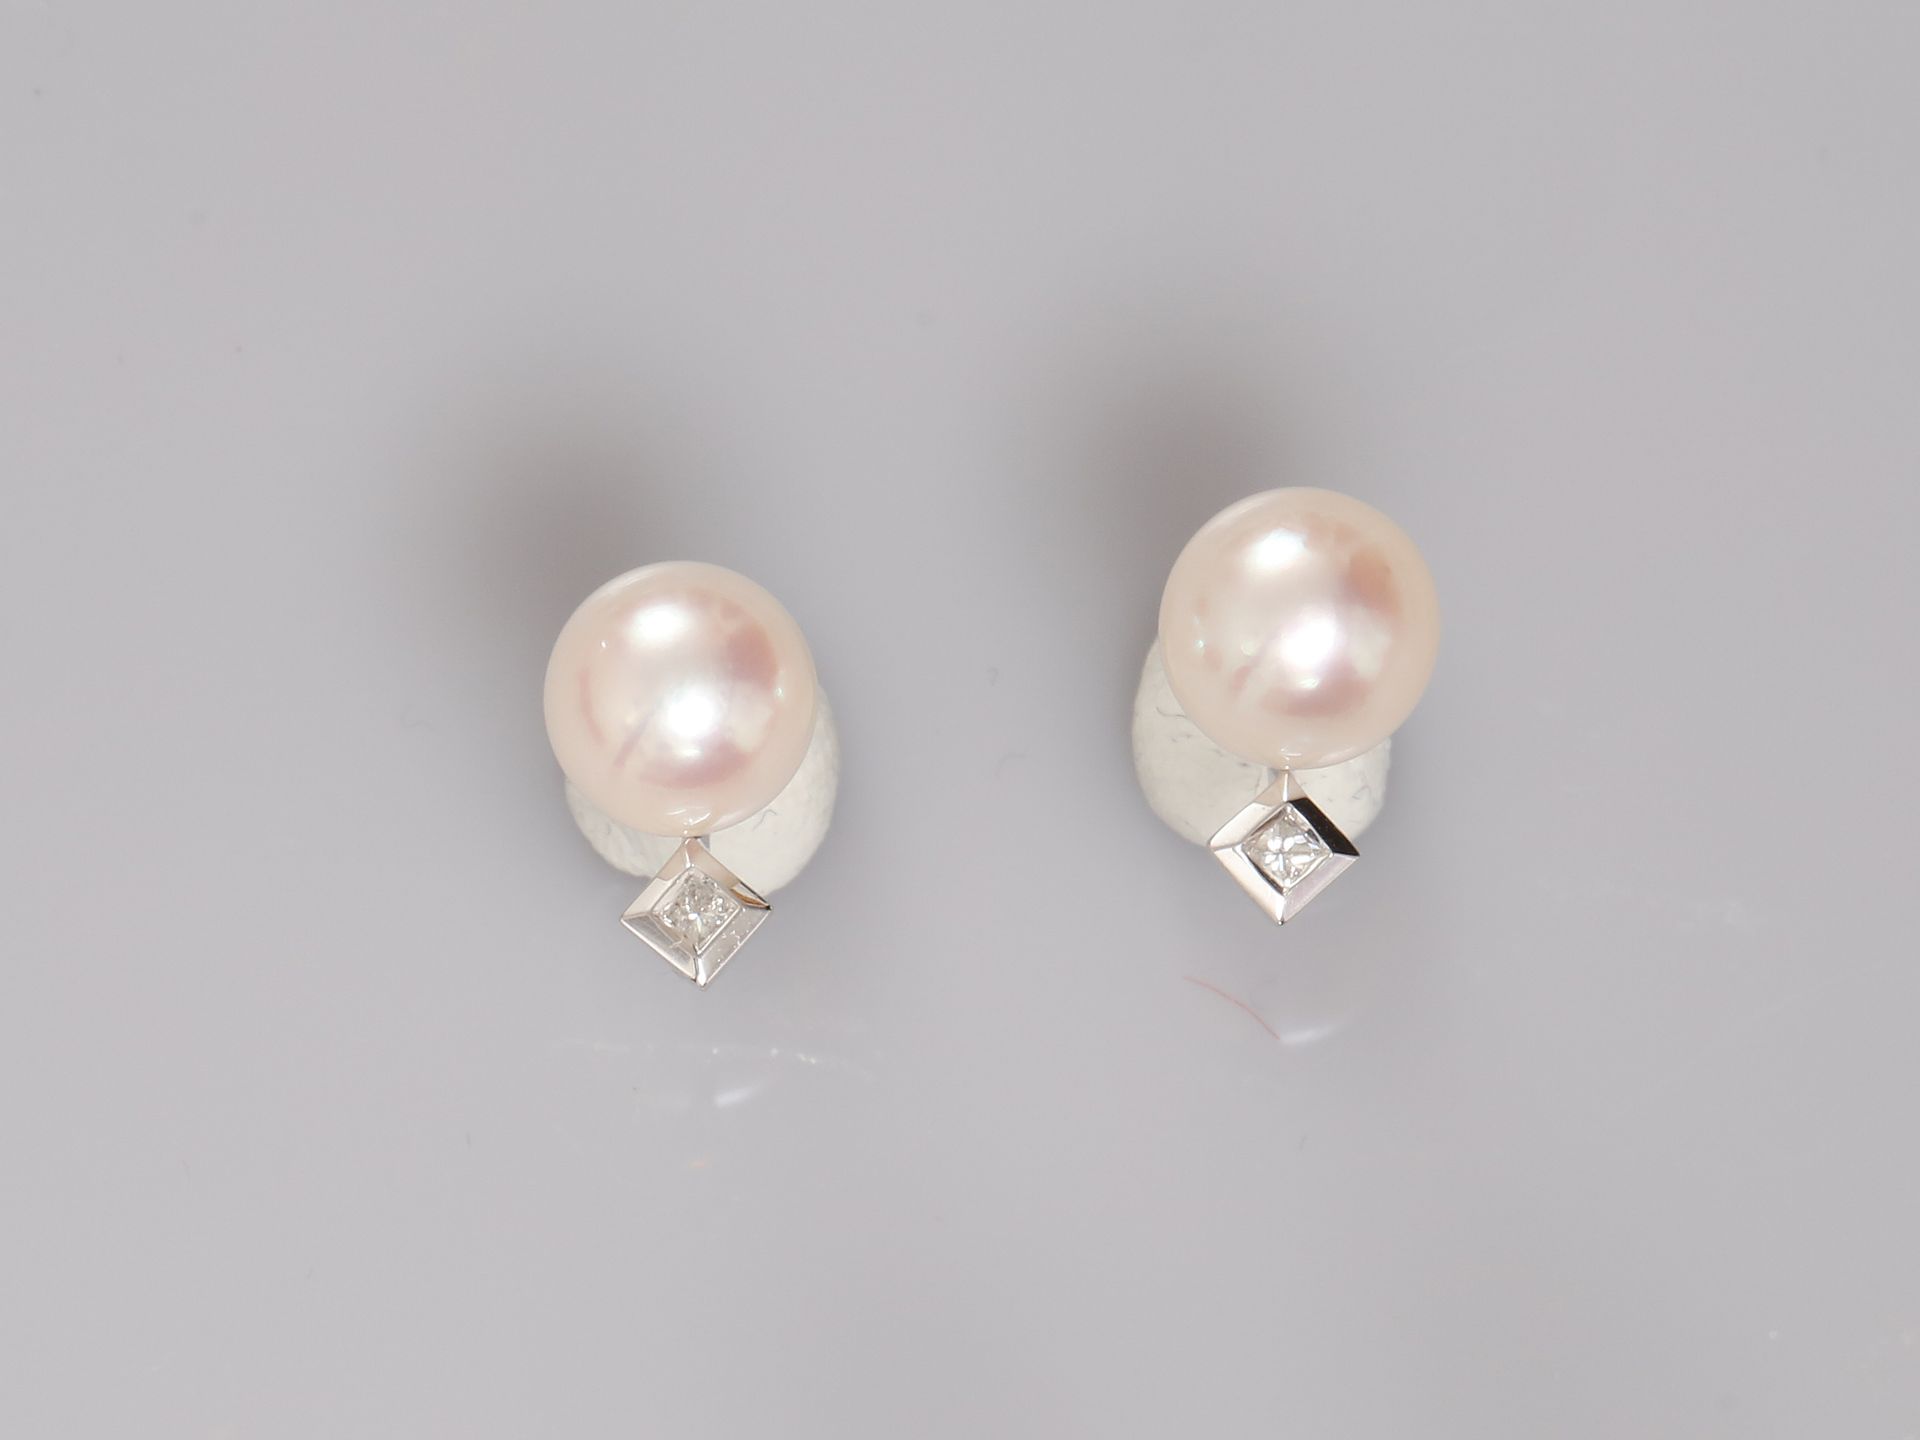 Null Earrings in white gold, 750 MM, each adorned with a Japanese cultured pearl&hellip;